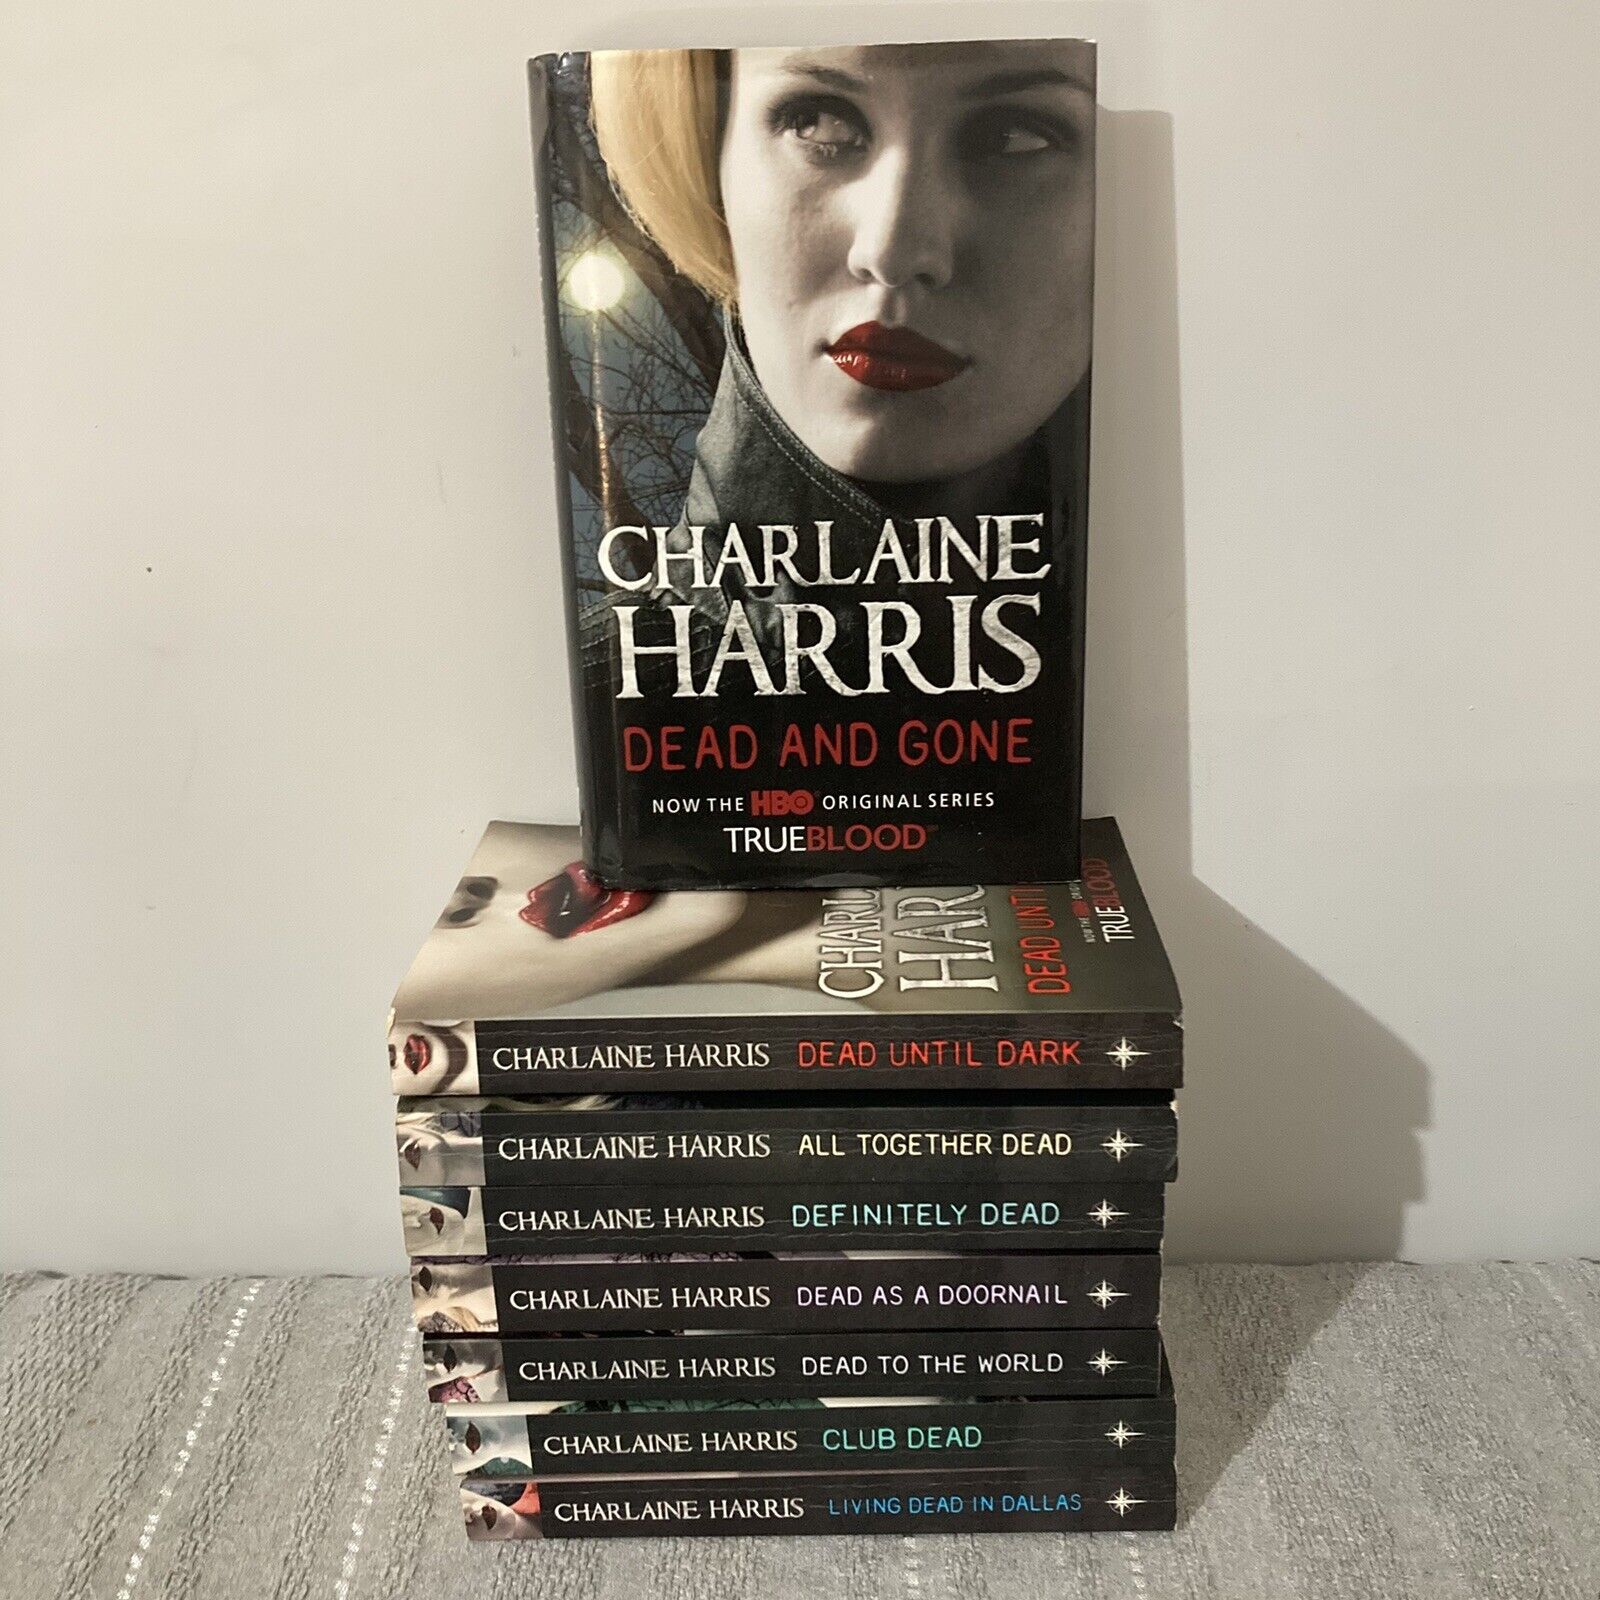 8 x True Blood Books by Charlaine Harris (7 x Paperback, 1 x Hard Cover) 